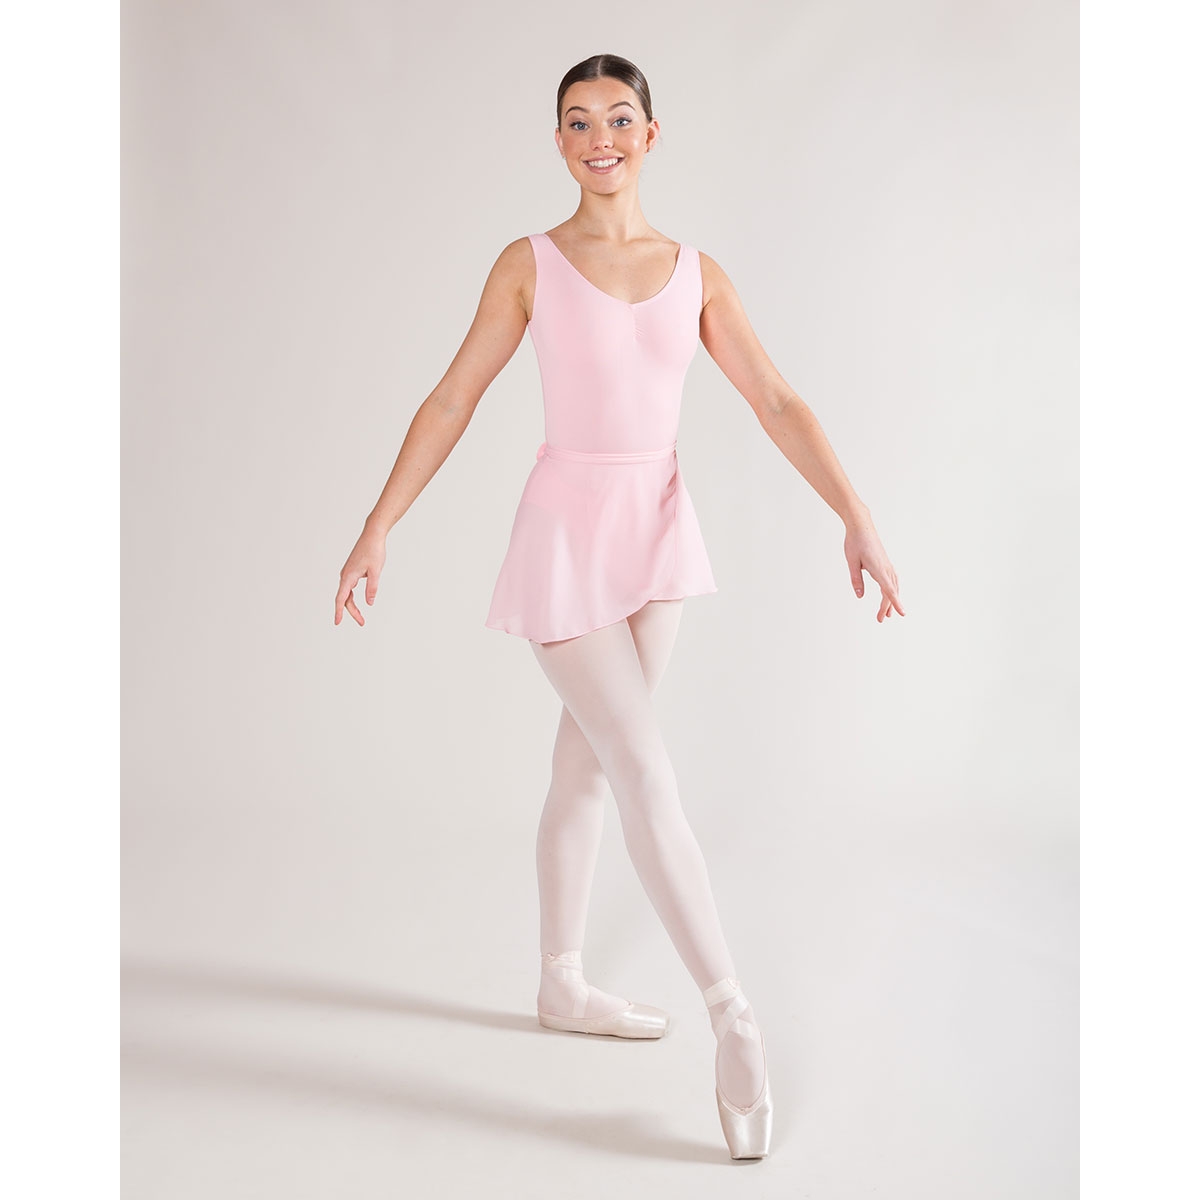  Shiny Metallic Leggings For Big Girls 9-10 Years Dance Gym  Ballet Sparkly Pink Ankle Length Stretch Activewear